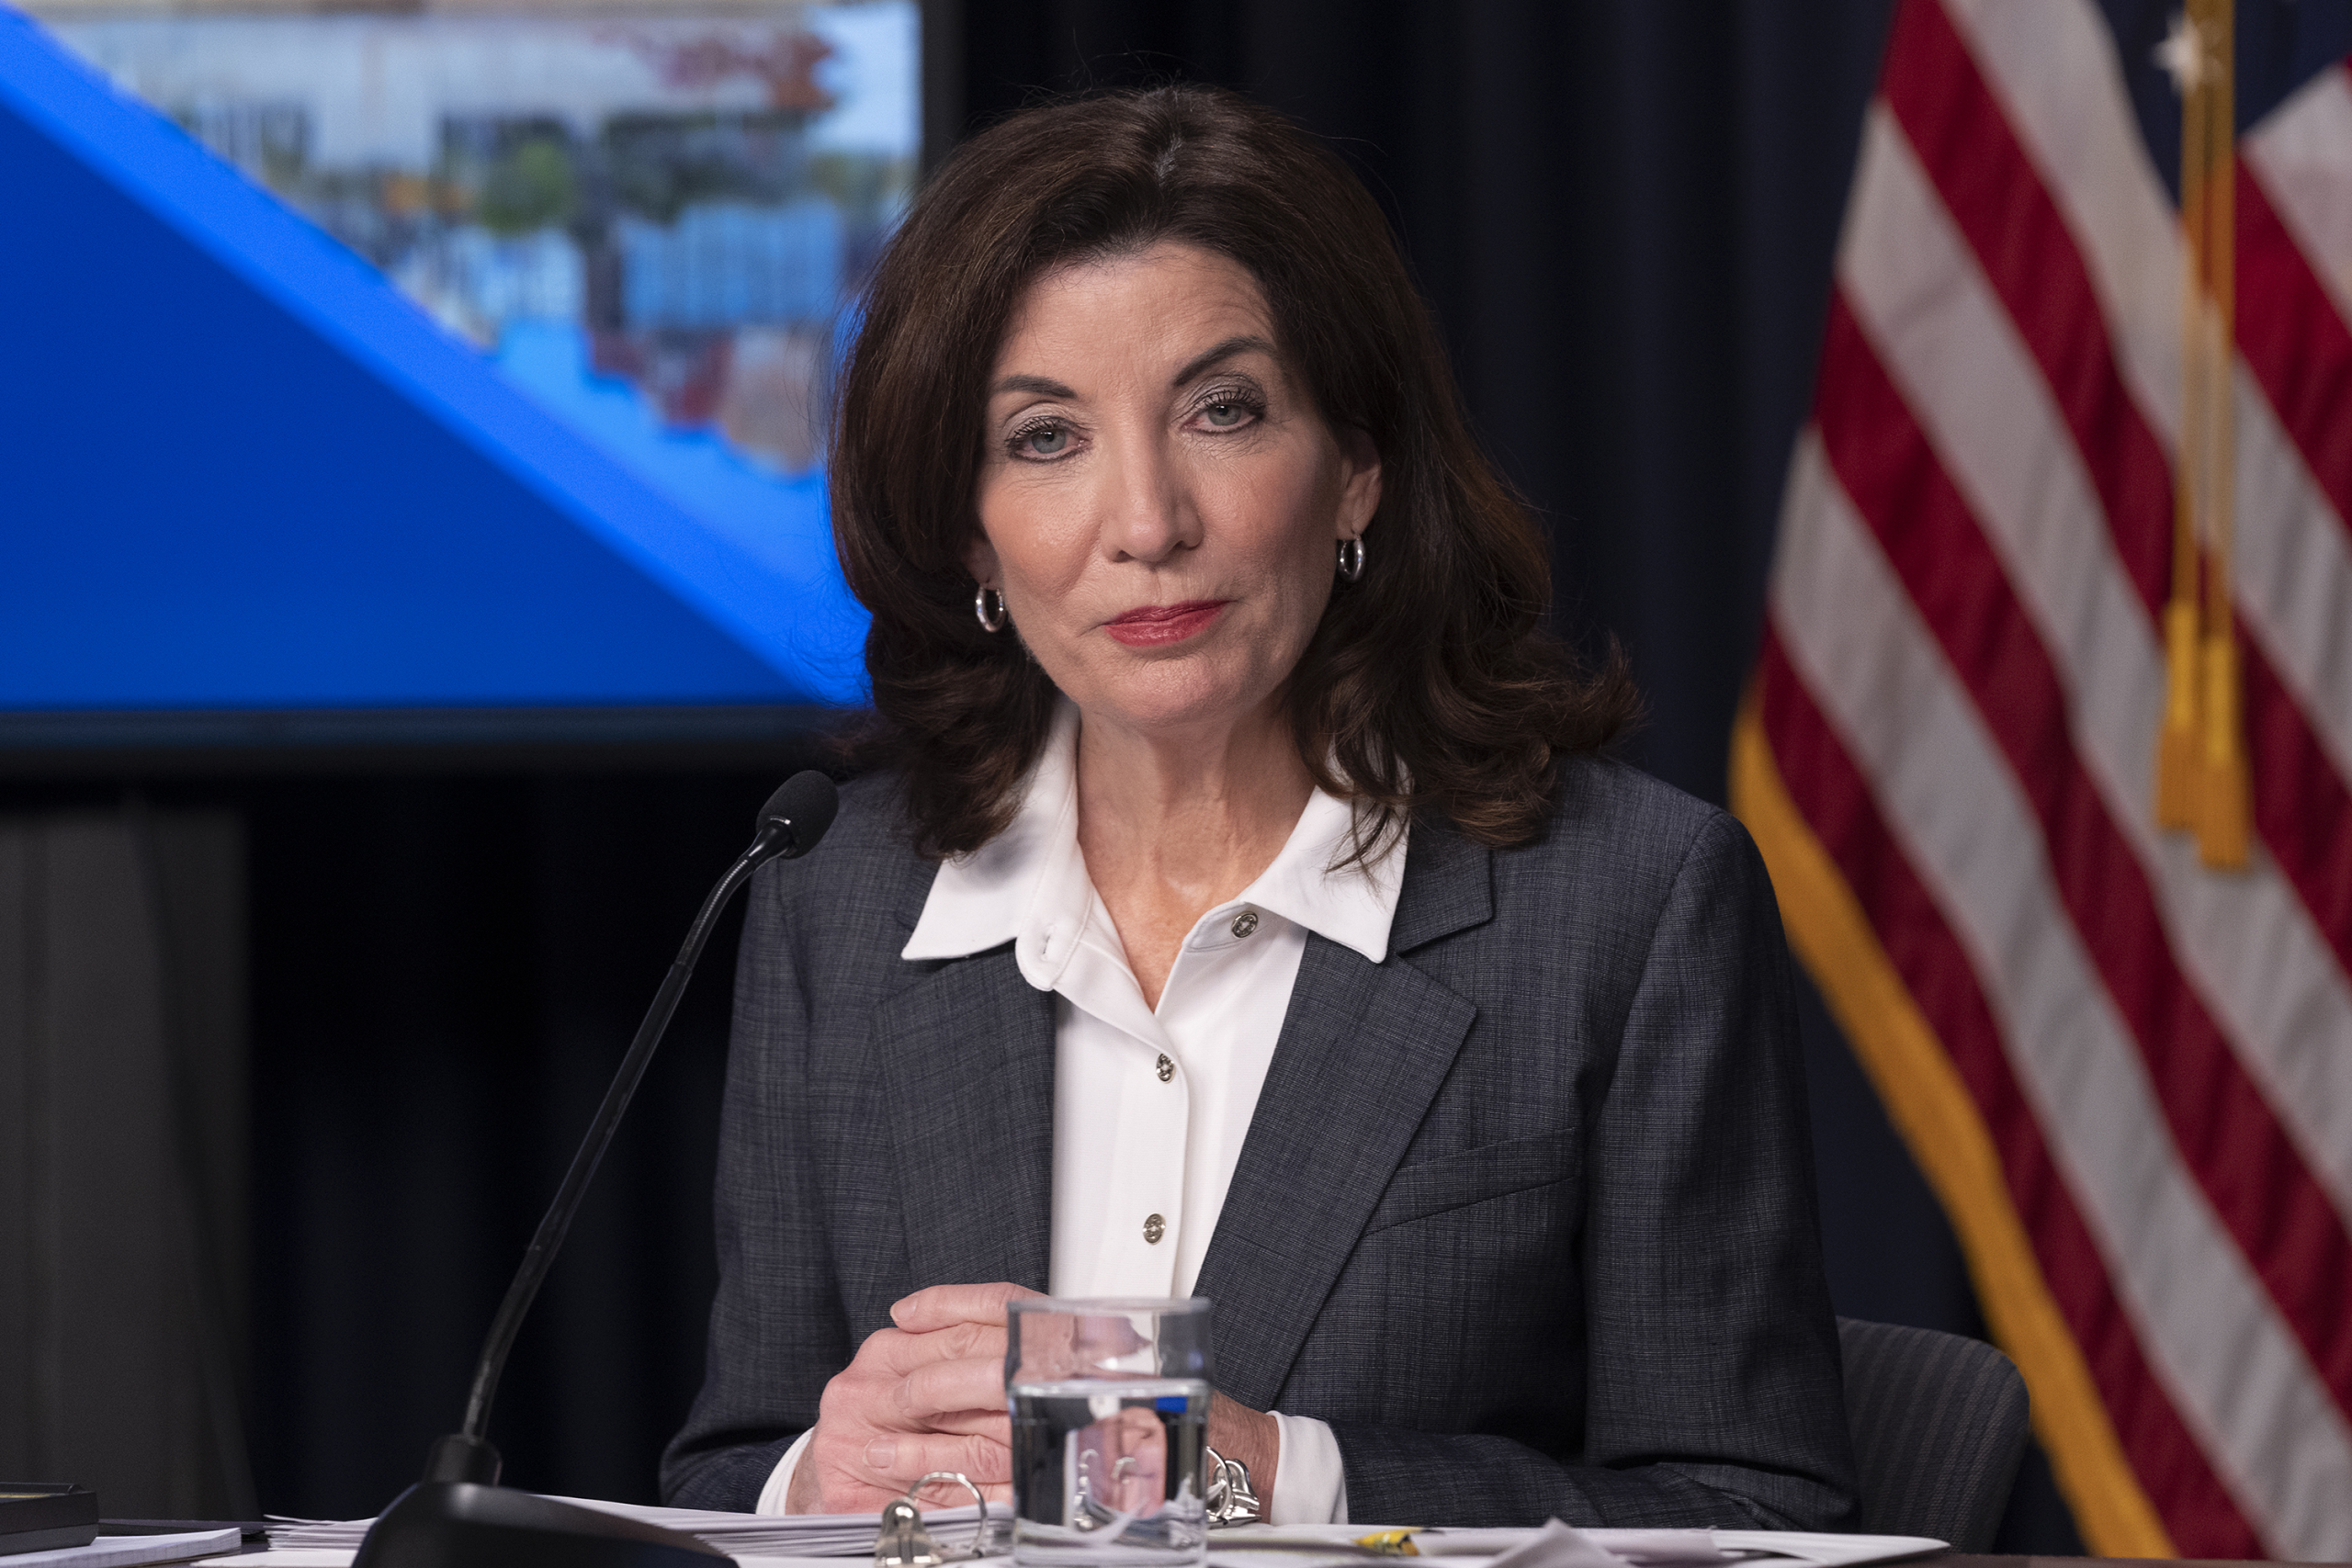 Racism Isn’t a Crisis, Gov. Hochul – Lust for Power Is a Crisis